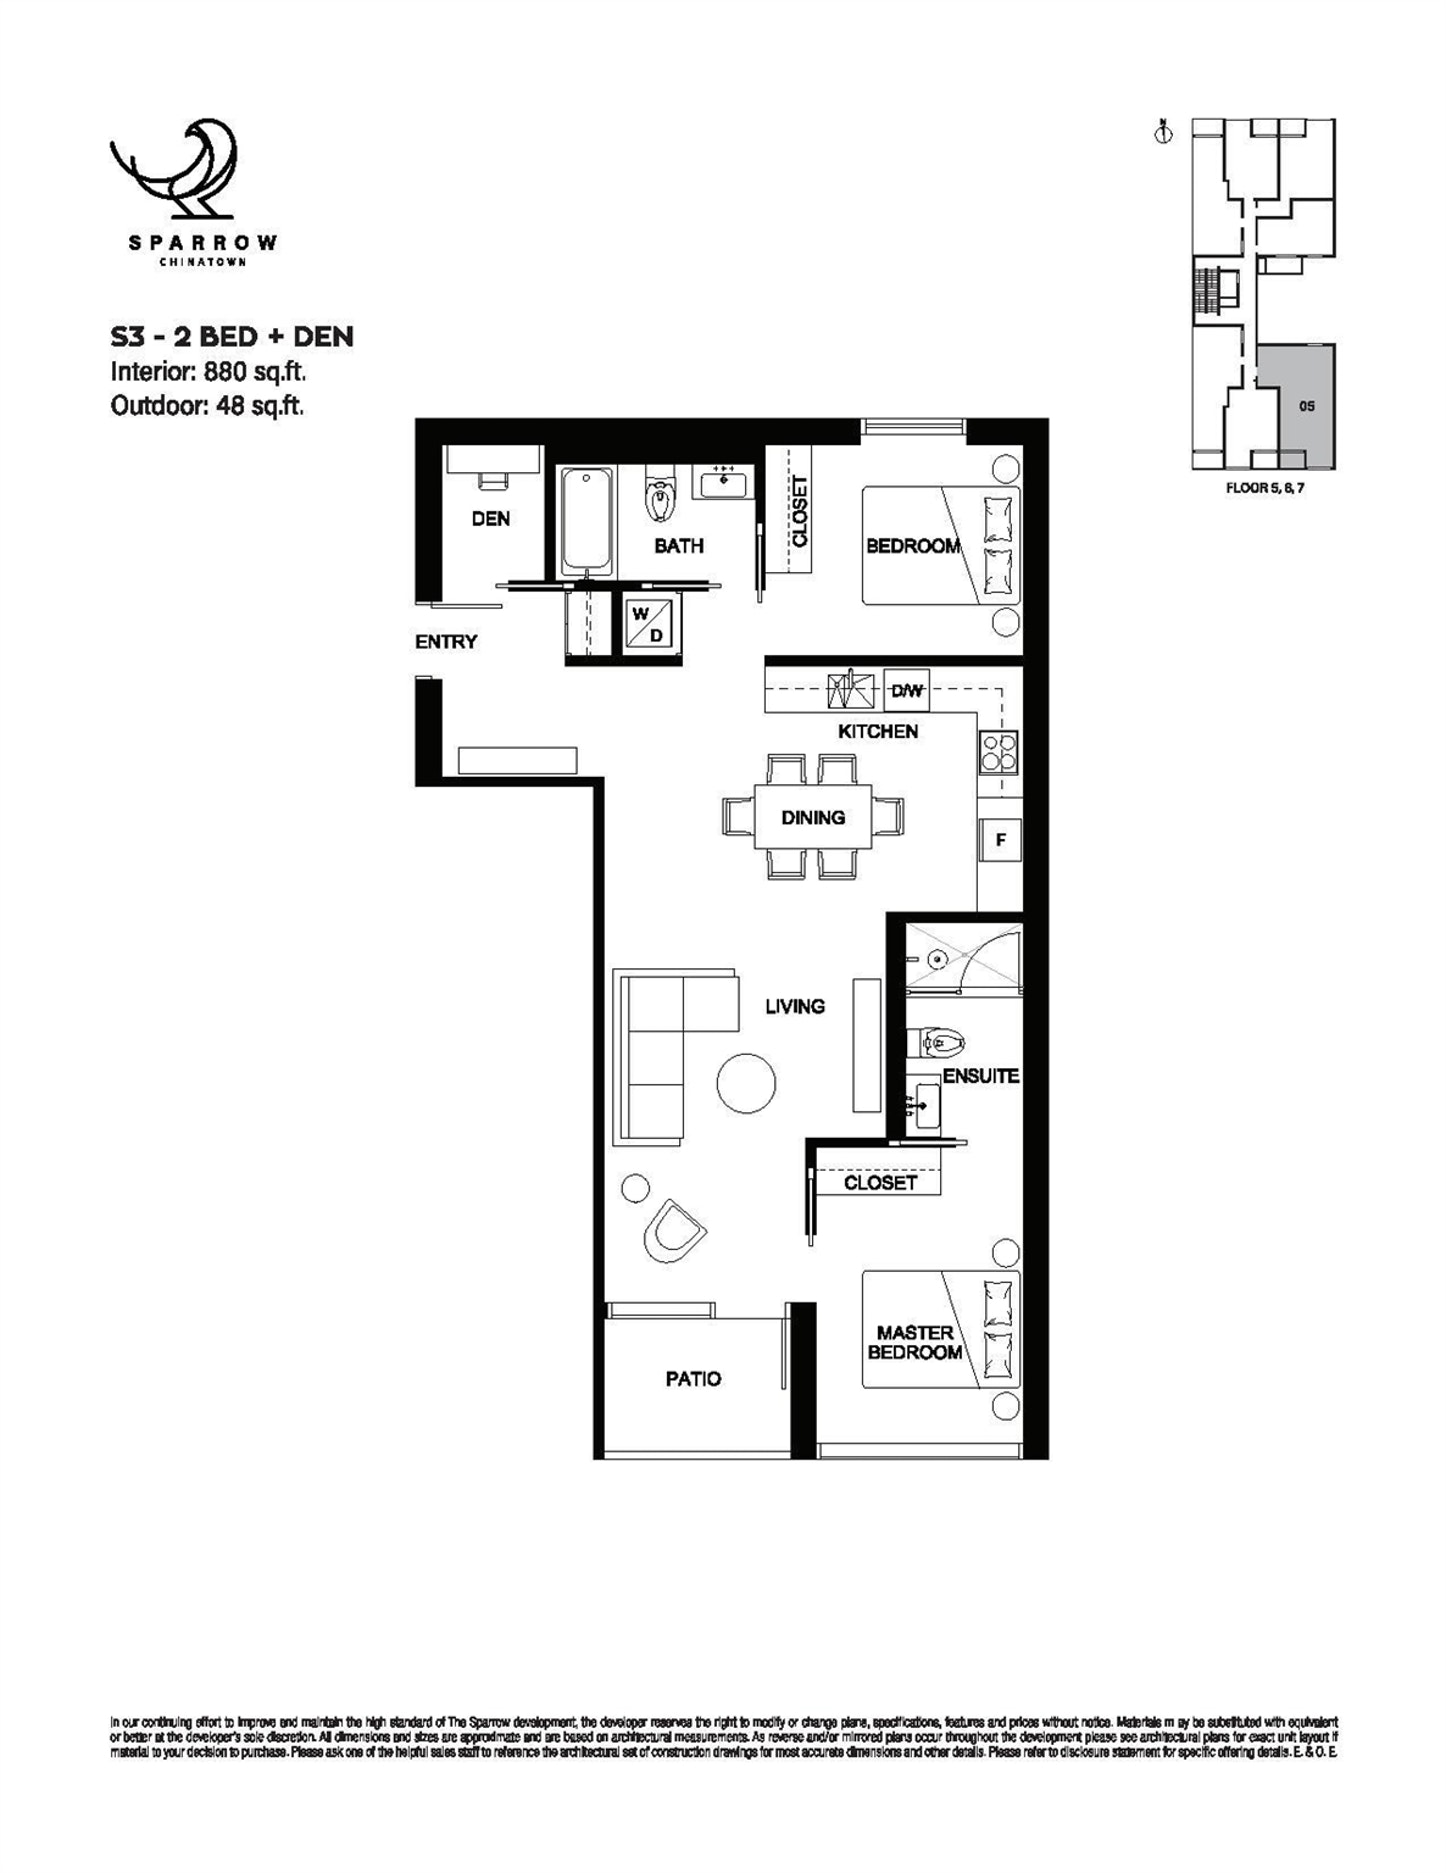 605 Floor Plan of Sparrow Condos with undefined beds